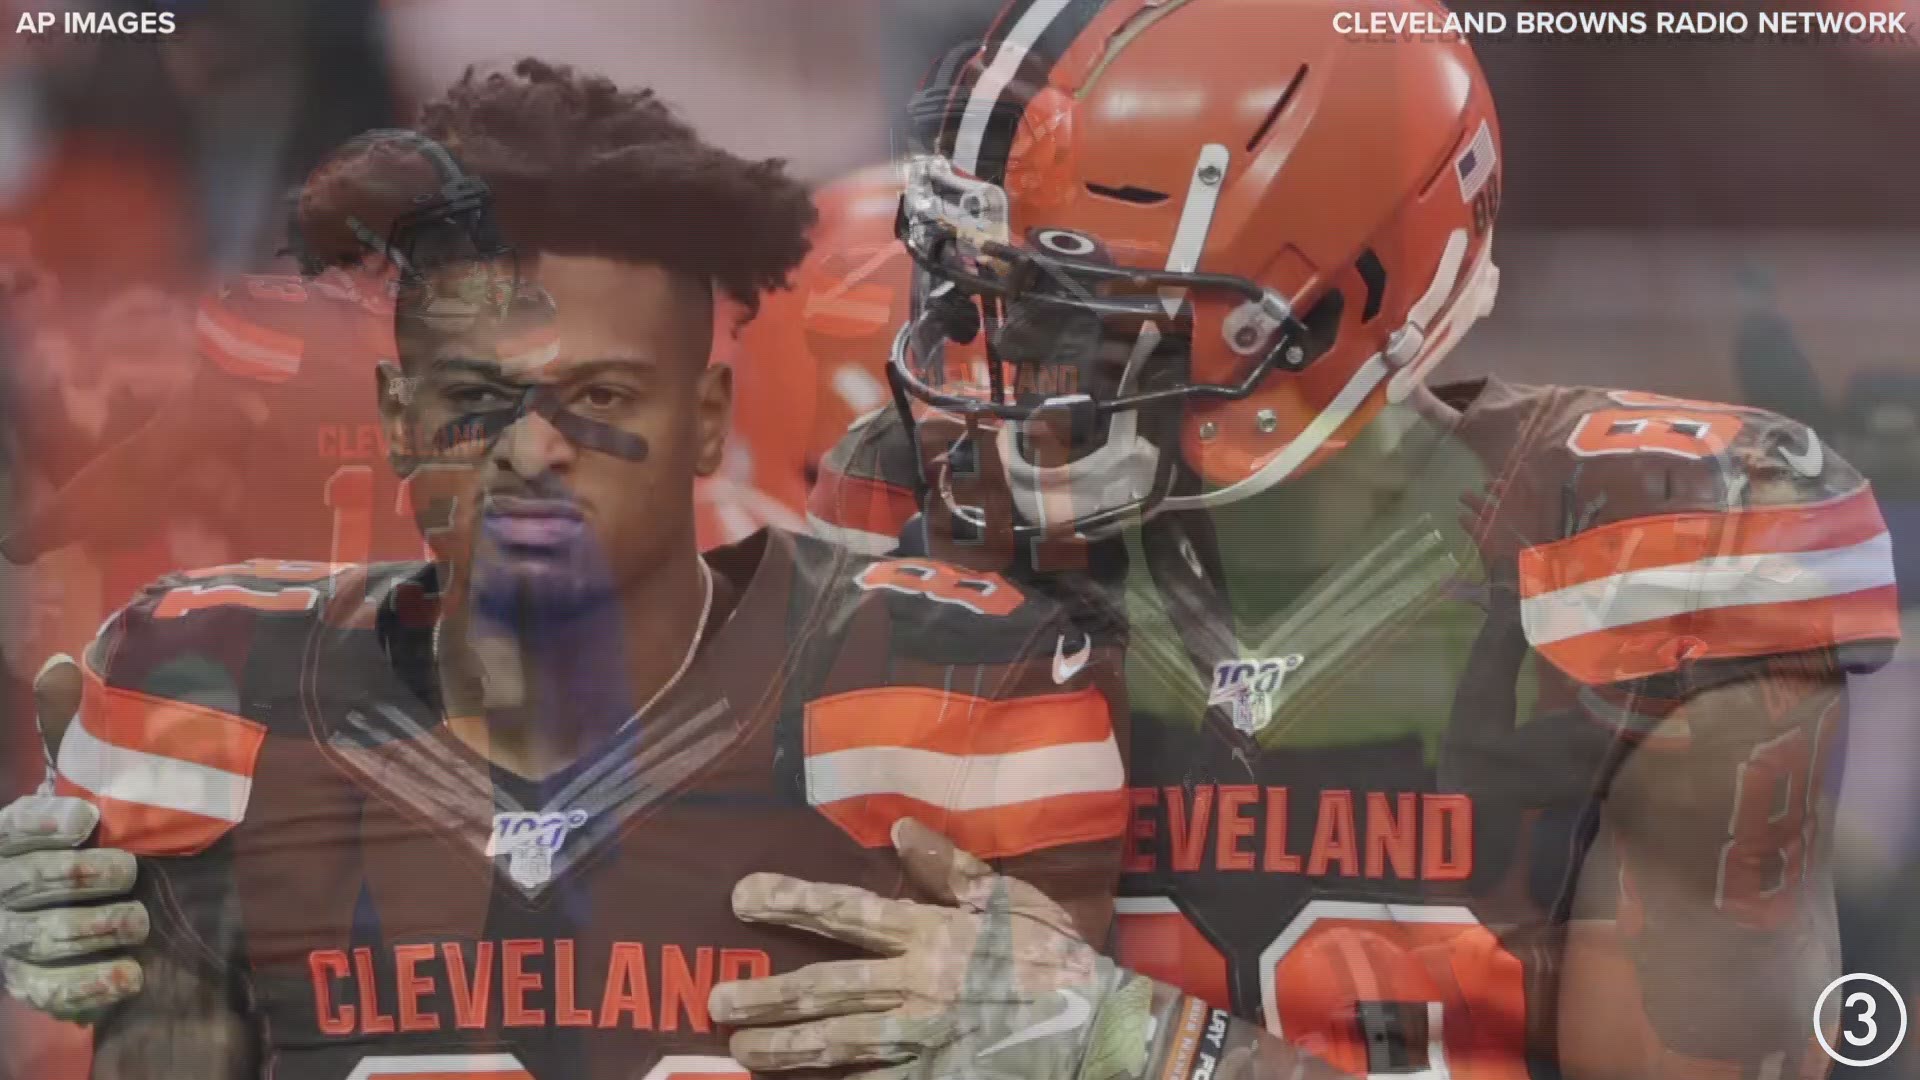 Cleveland Browns wide receiver Rashard Higgins said he had a dream about catching a touchdown the night before he caught a game-winner vs. the Buffalo Bills.